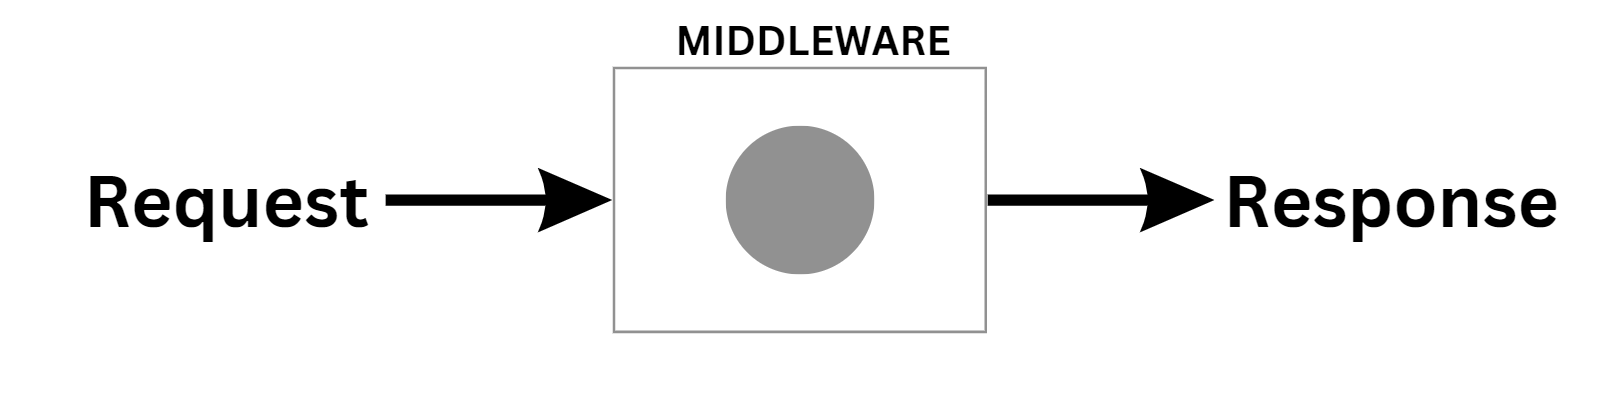 MIDDLEWARE.png